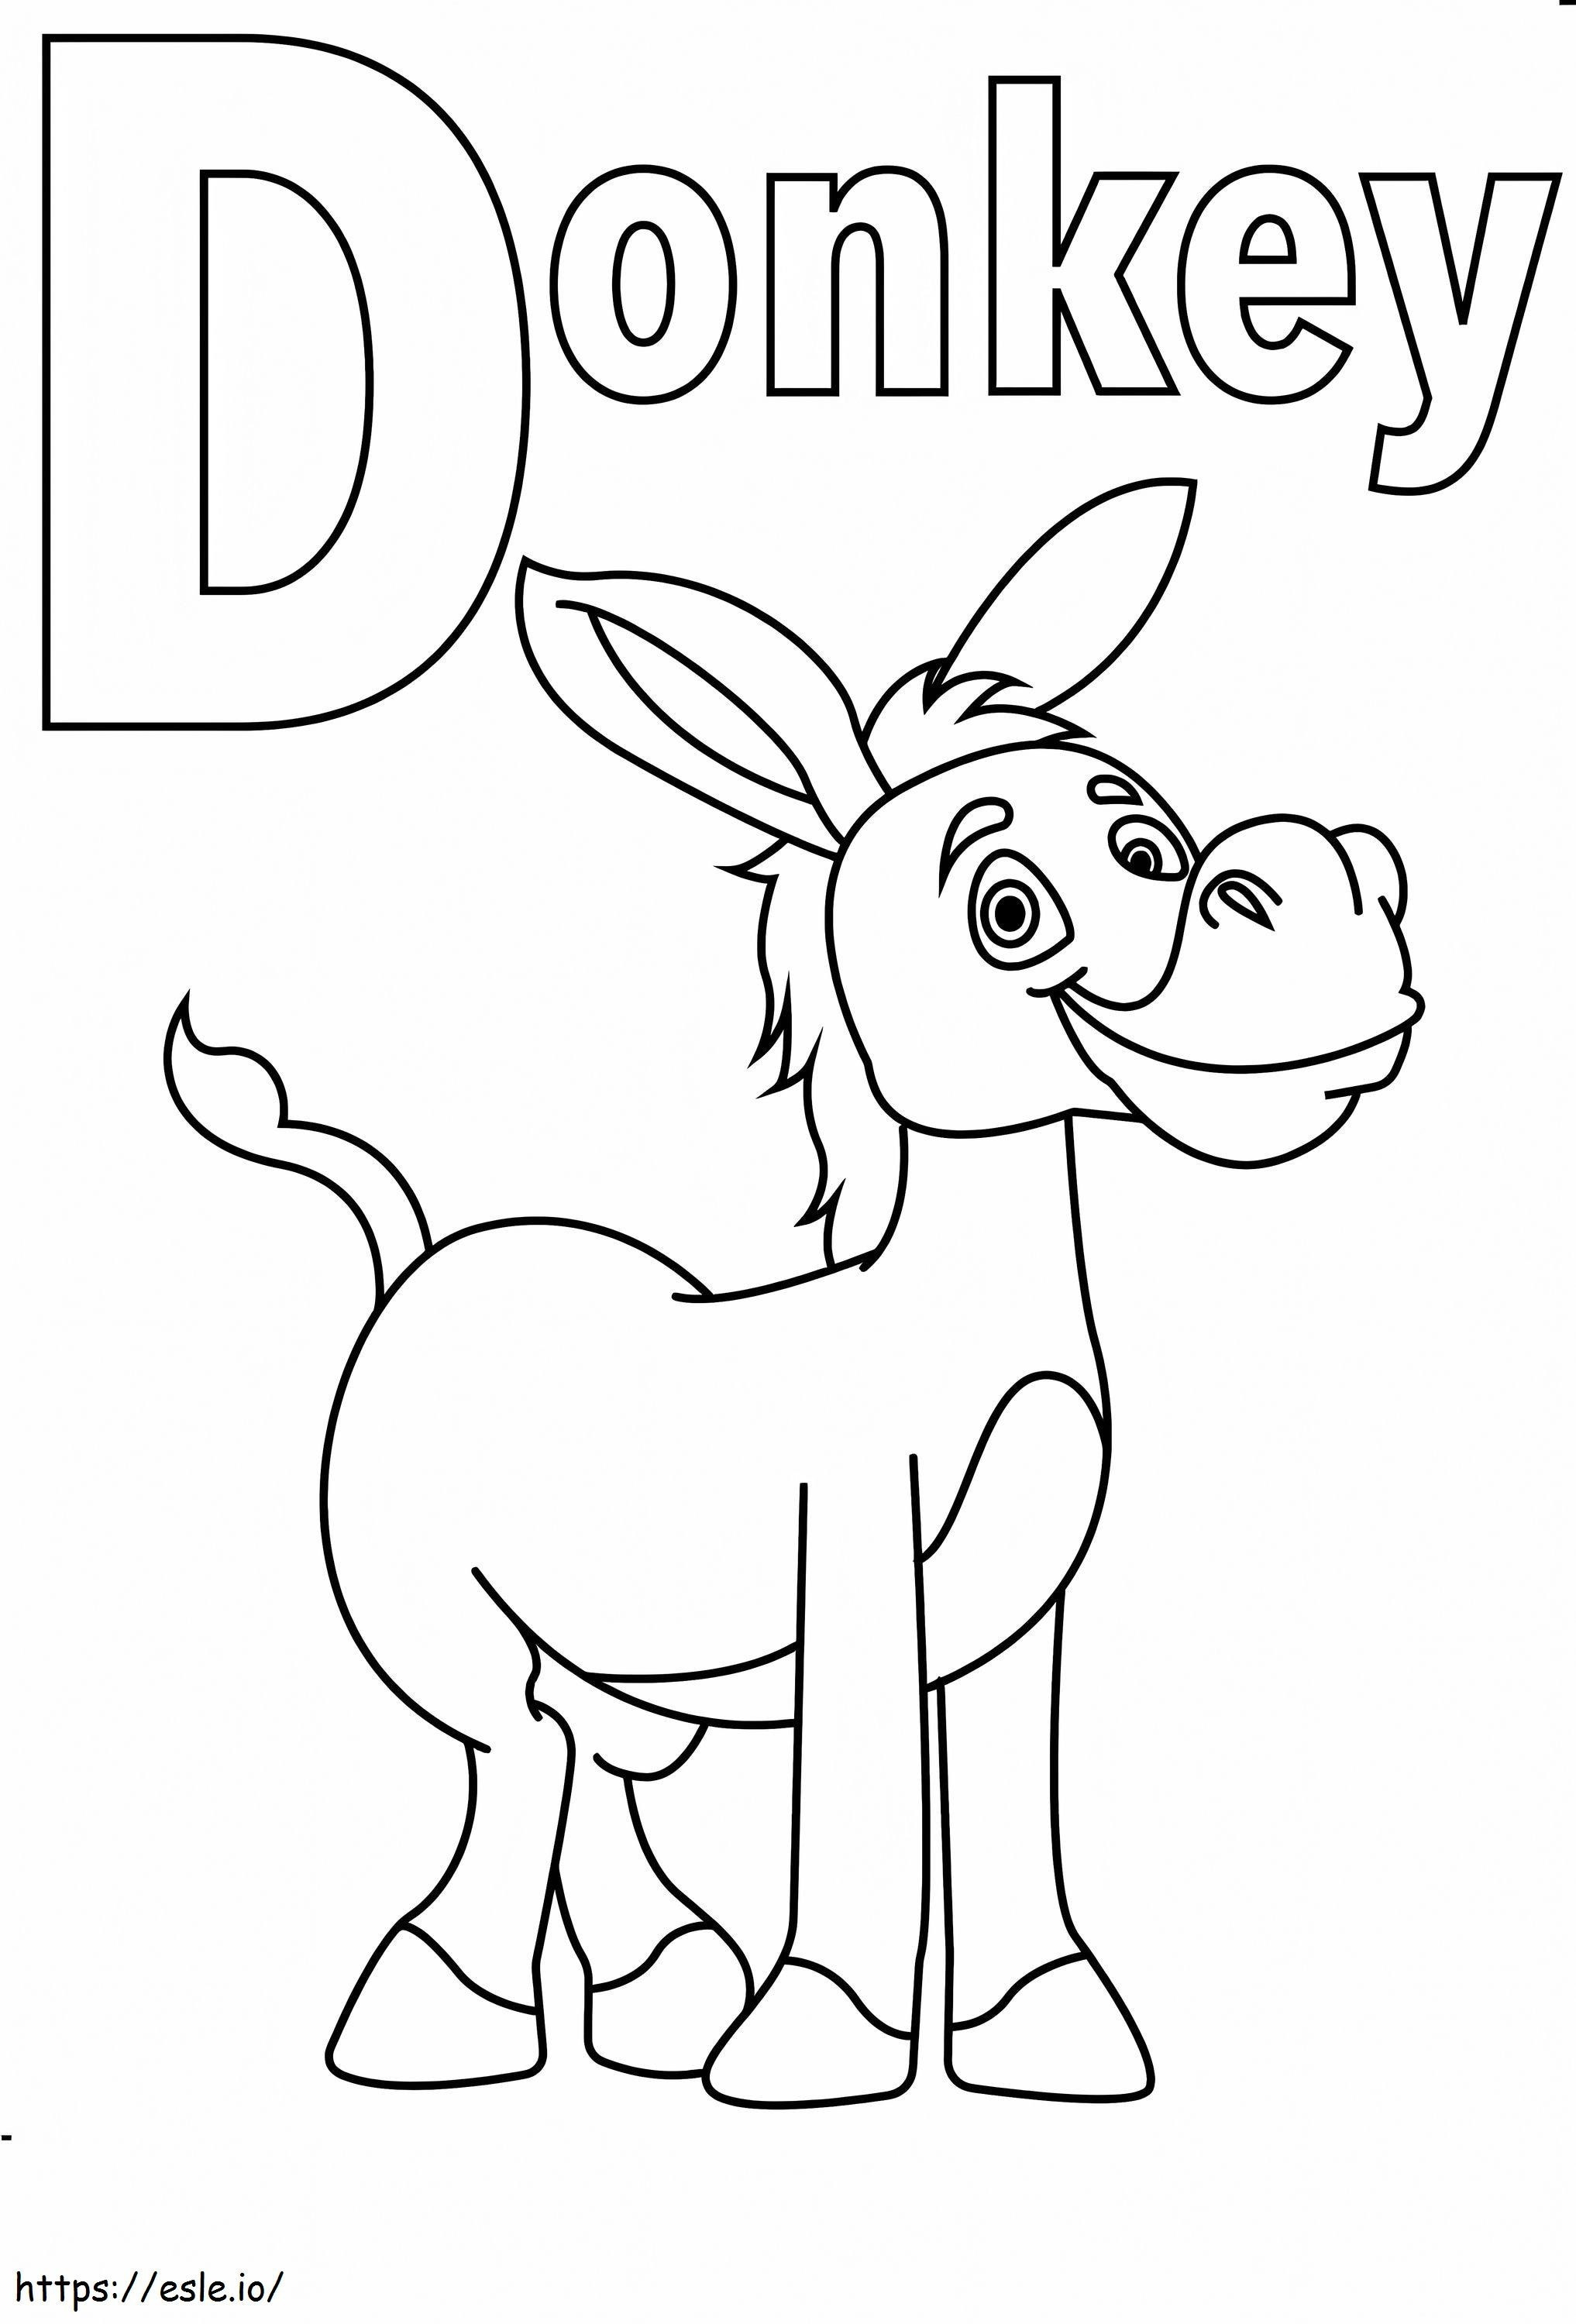 Awesome Donkey coloring page